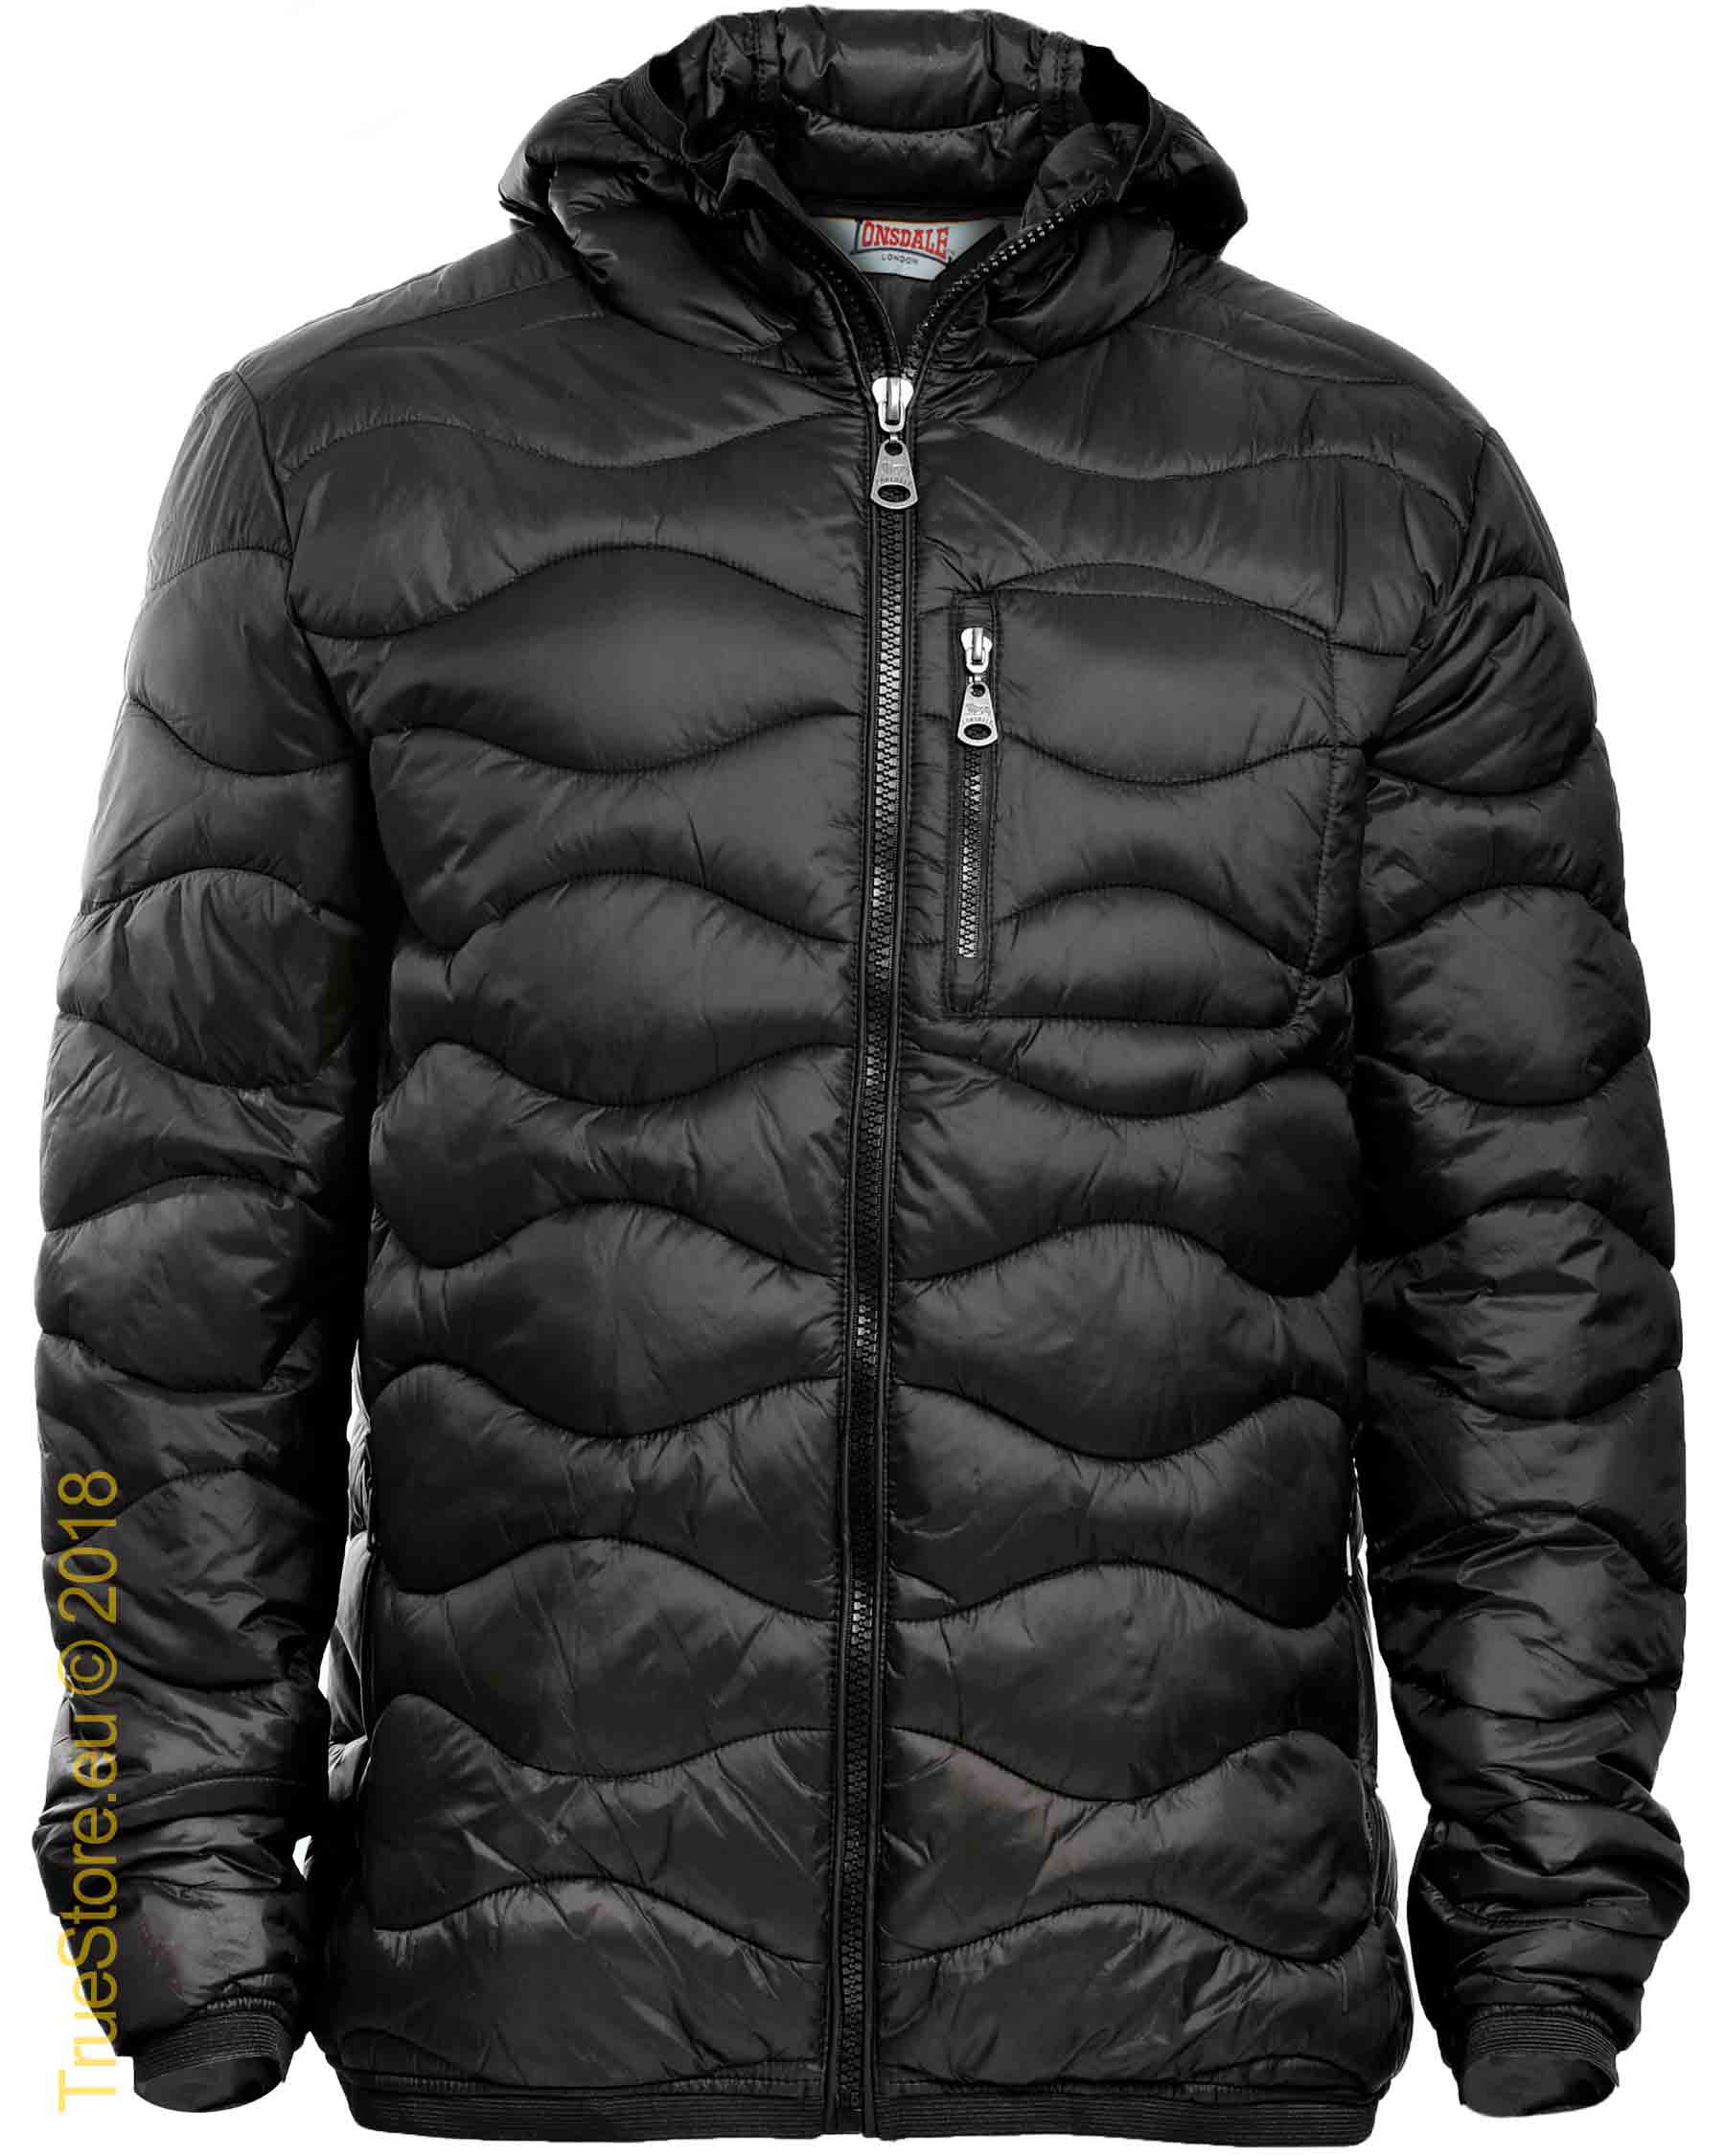 Lonsdale quilted jacket Beeston - Mens Jackets - Lonsdale London